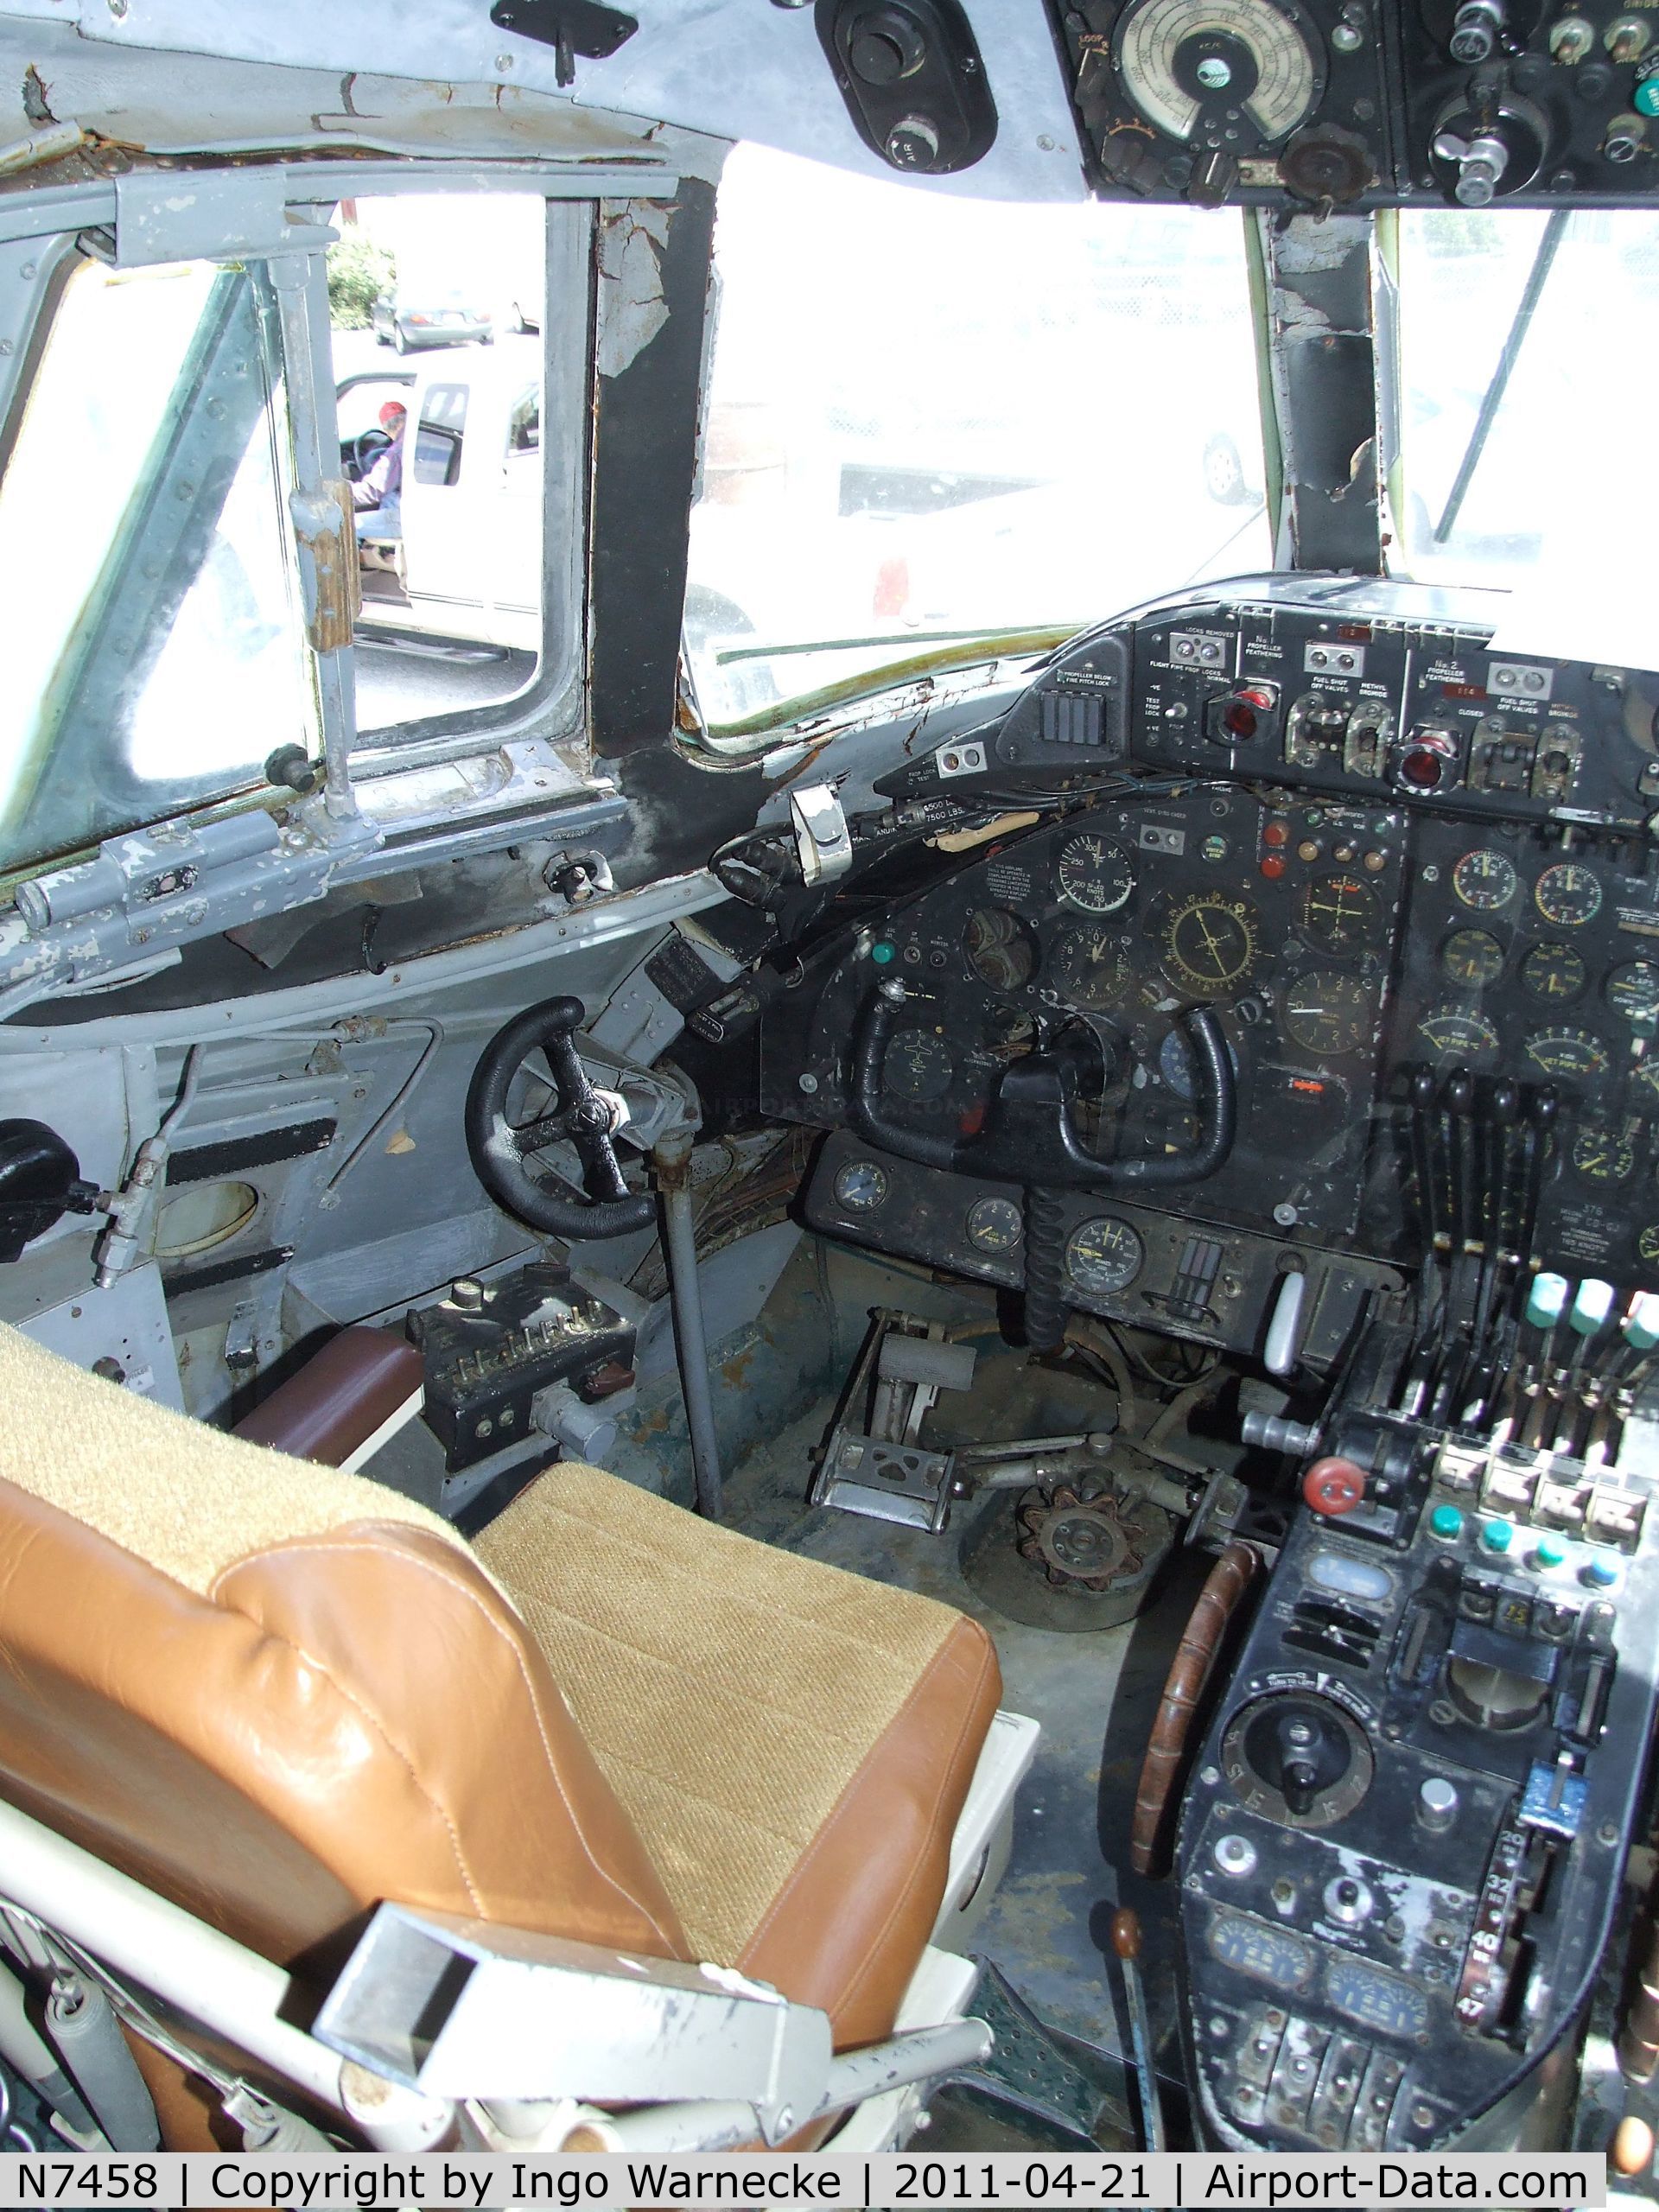 N7458, Vickers Viscount 797 C/N 213, Vickers Viscount 797 (cockpit section only) at the Wings of History Air Museum, San Martin CA  #c